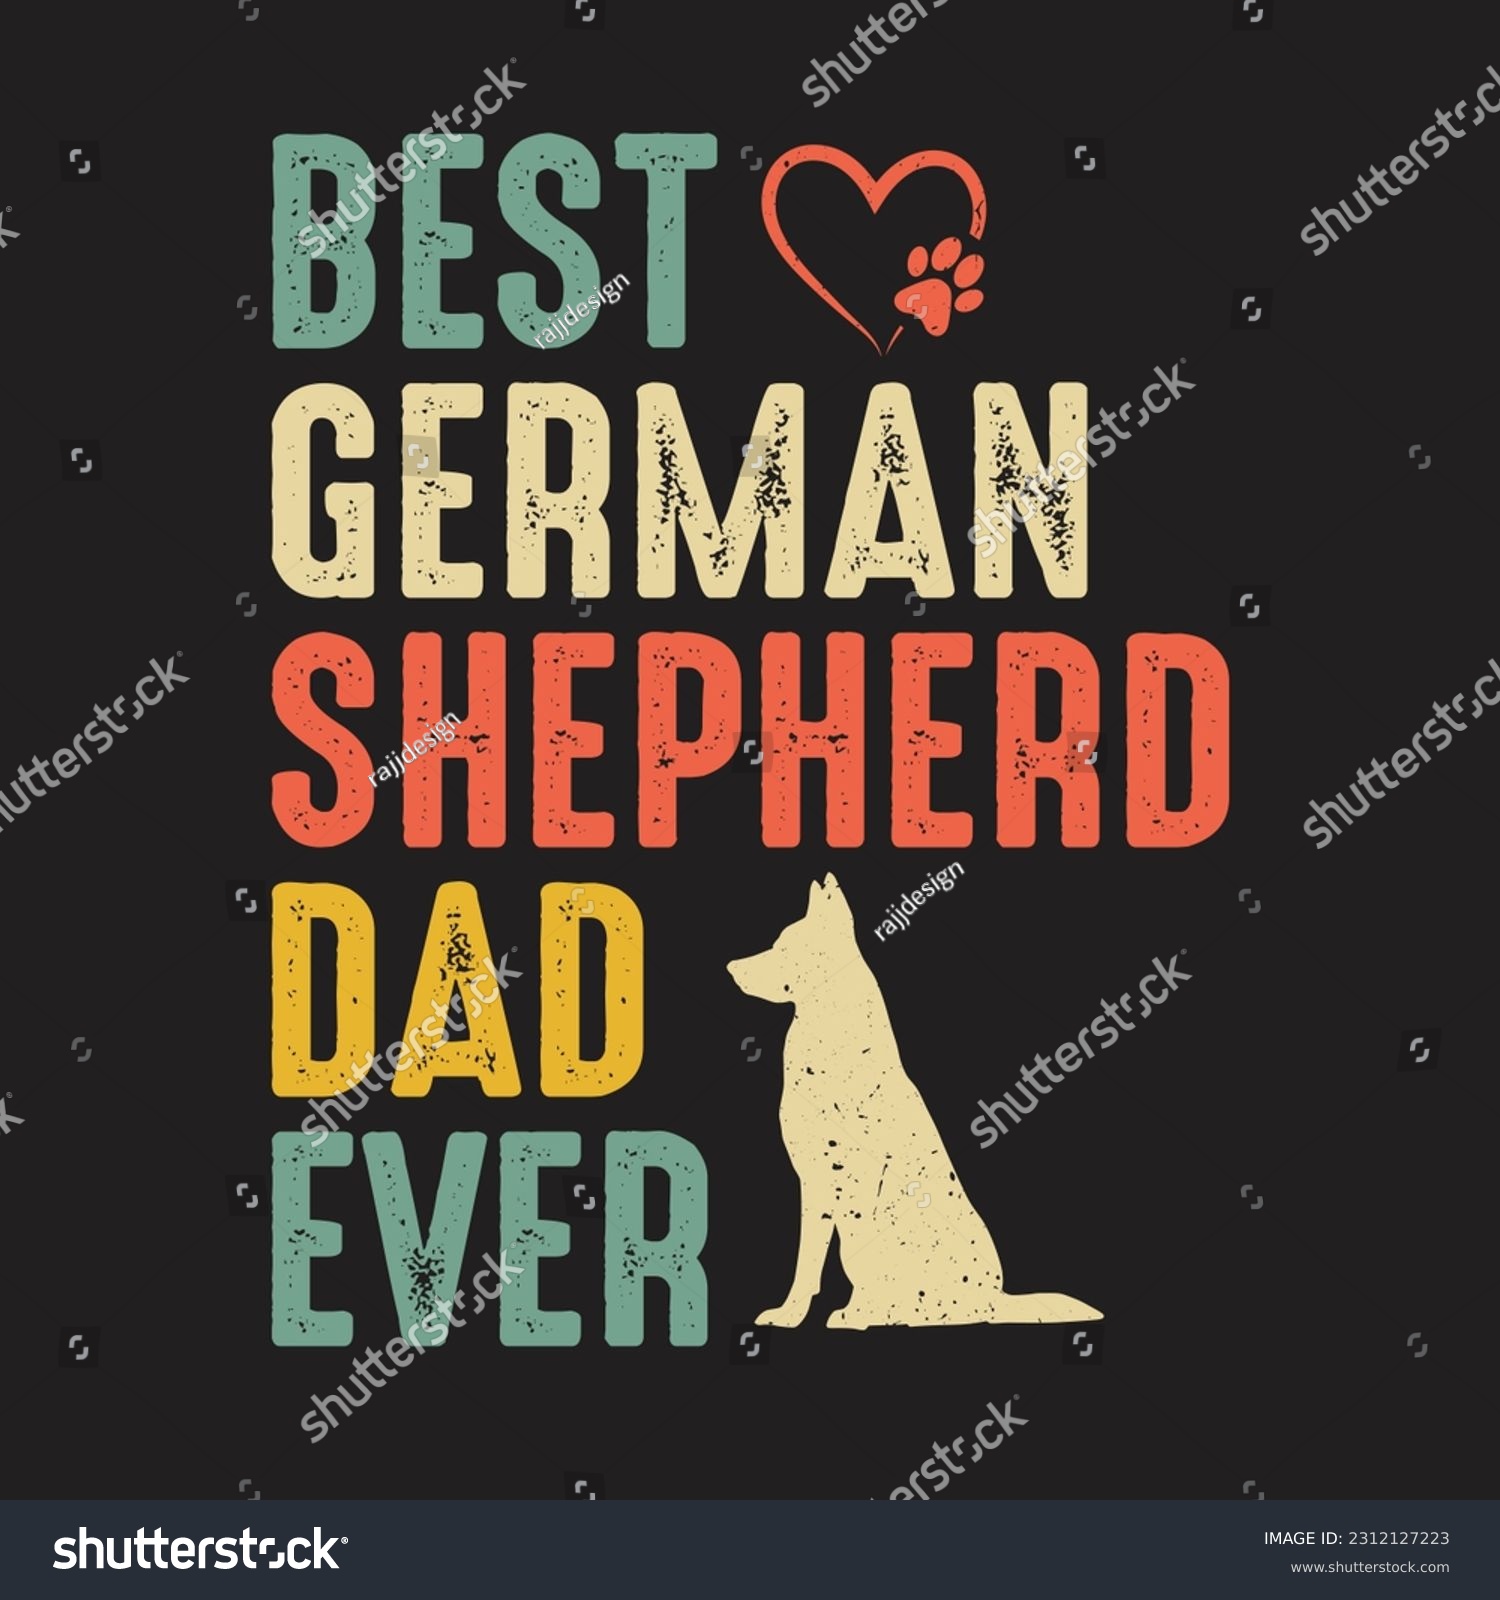 SVG of Best German Shepherd Dad Ever T-Shirt Design, Posters, Greeting Cards, Textiles, and Sticker Vector Illustration svg